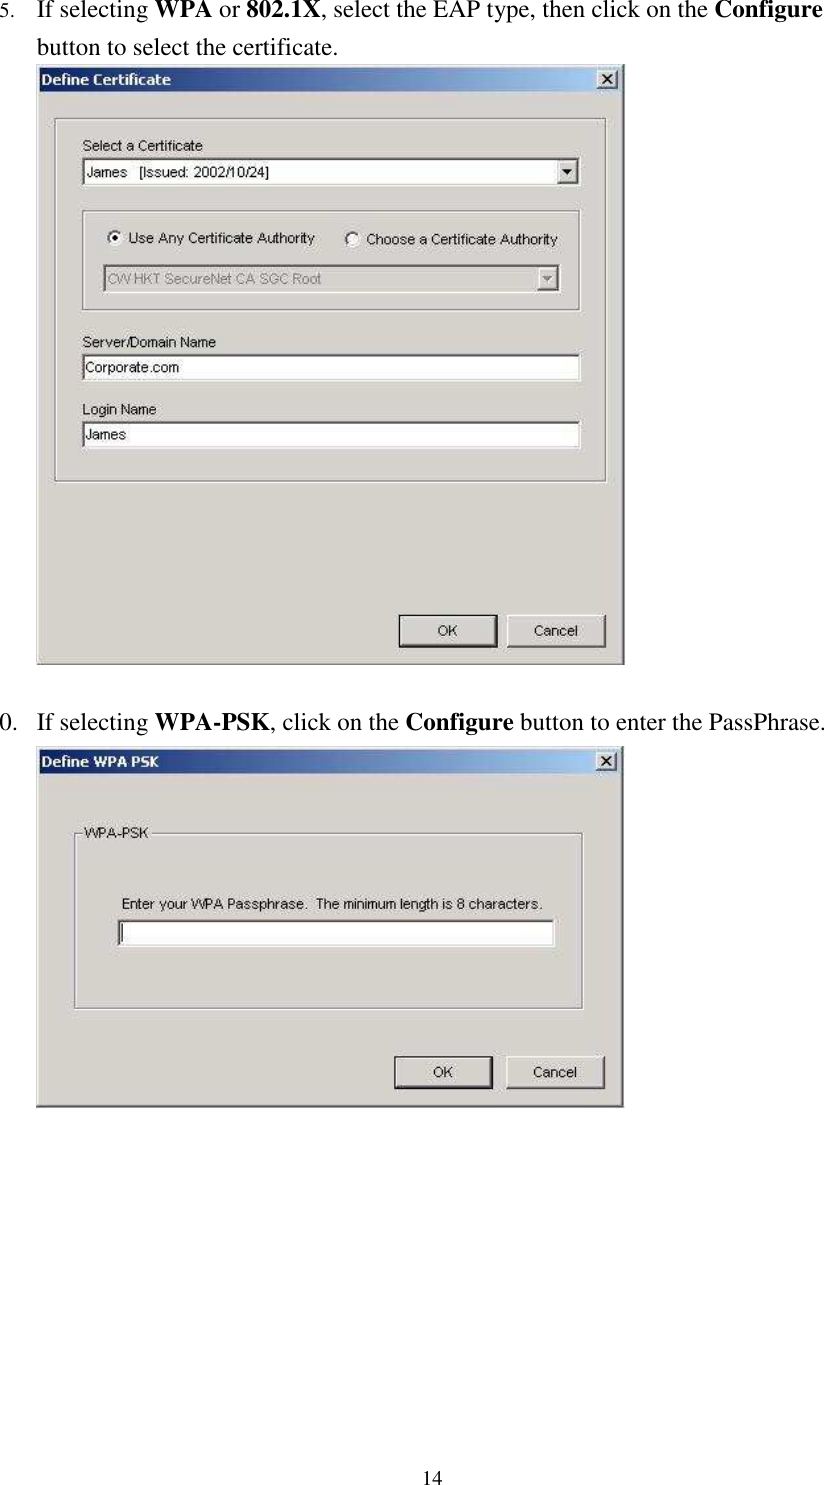   145. If selecting WPA or 802.1X, select the EAP type, then click on the Configure button to select the certificate.   0. If selecting WPA-PSK, click on the Configure button to enter the PassPhrase.   